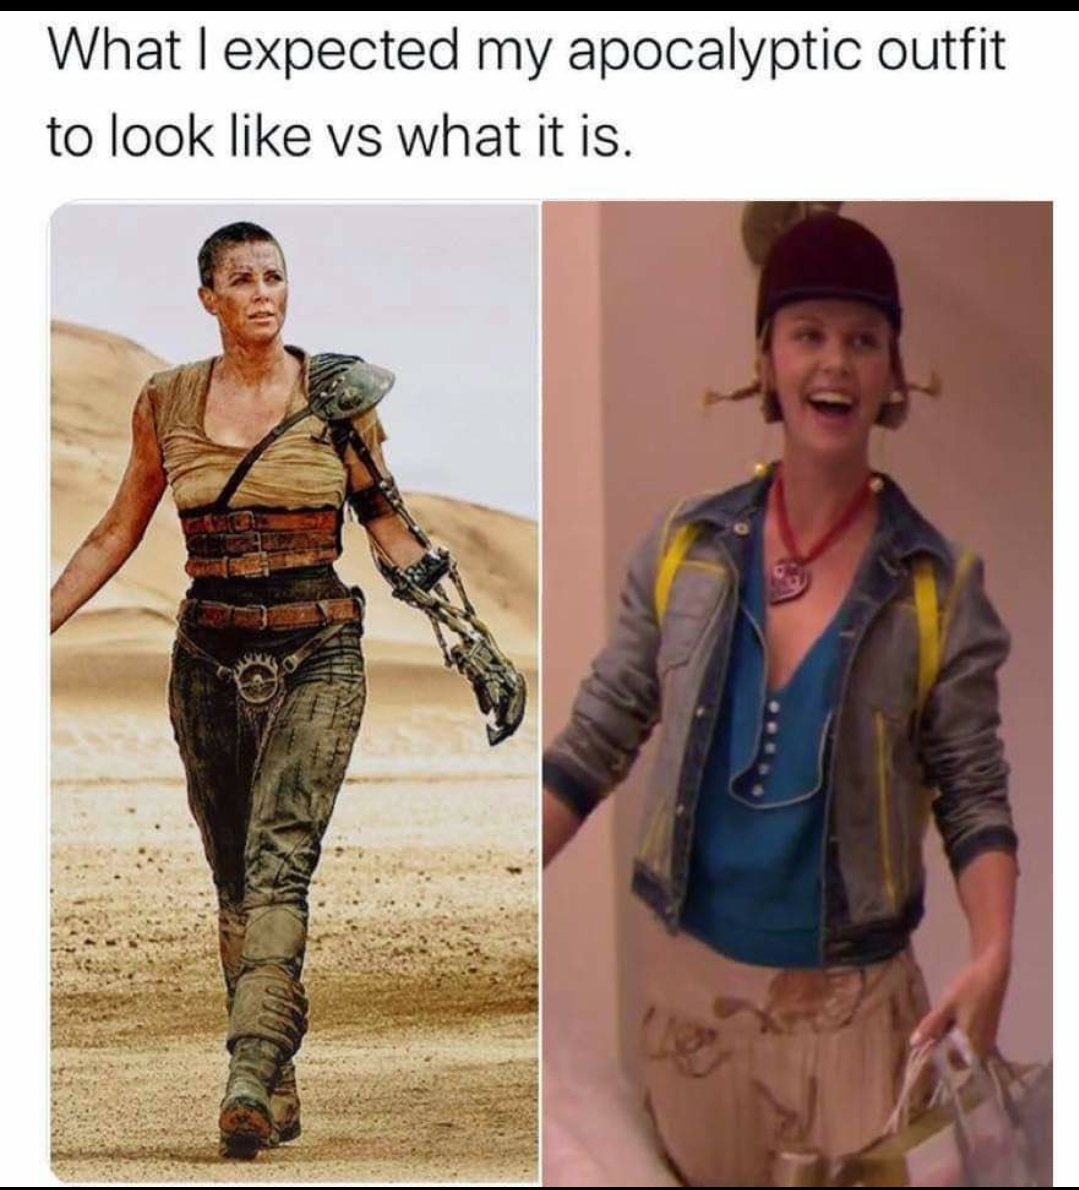 expected my apocalyptic outfit to look like - What I expected my apocalyptic outfit to look vs what it is.